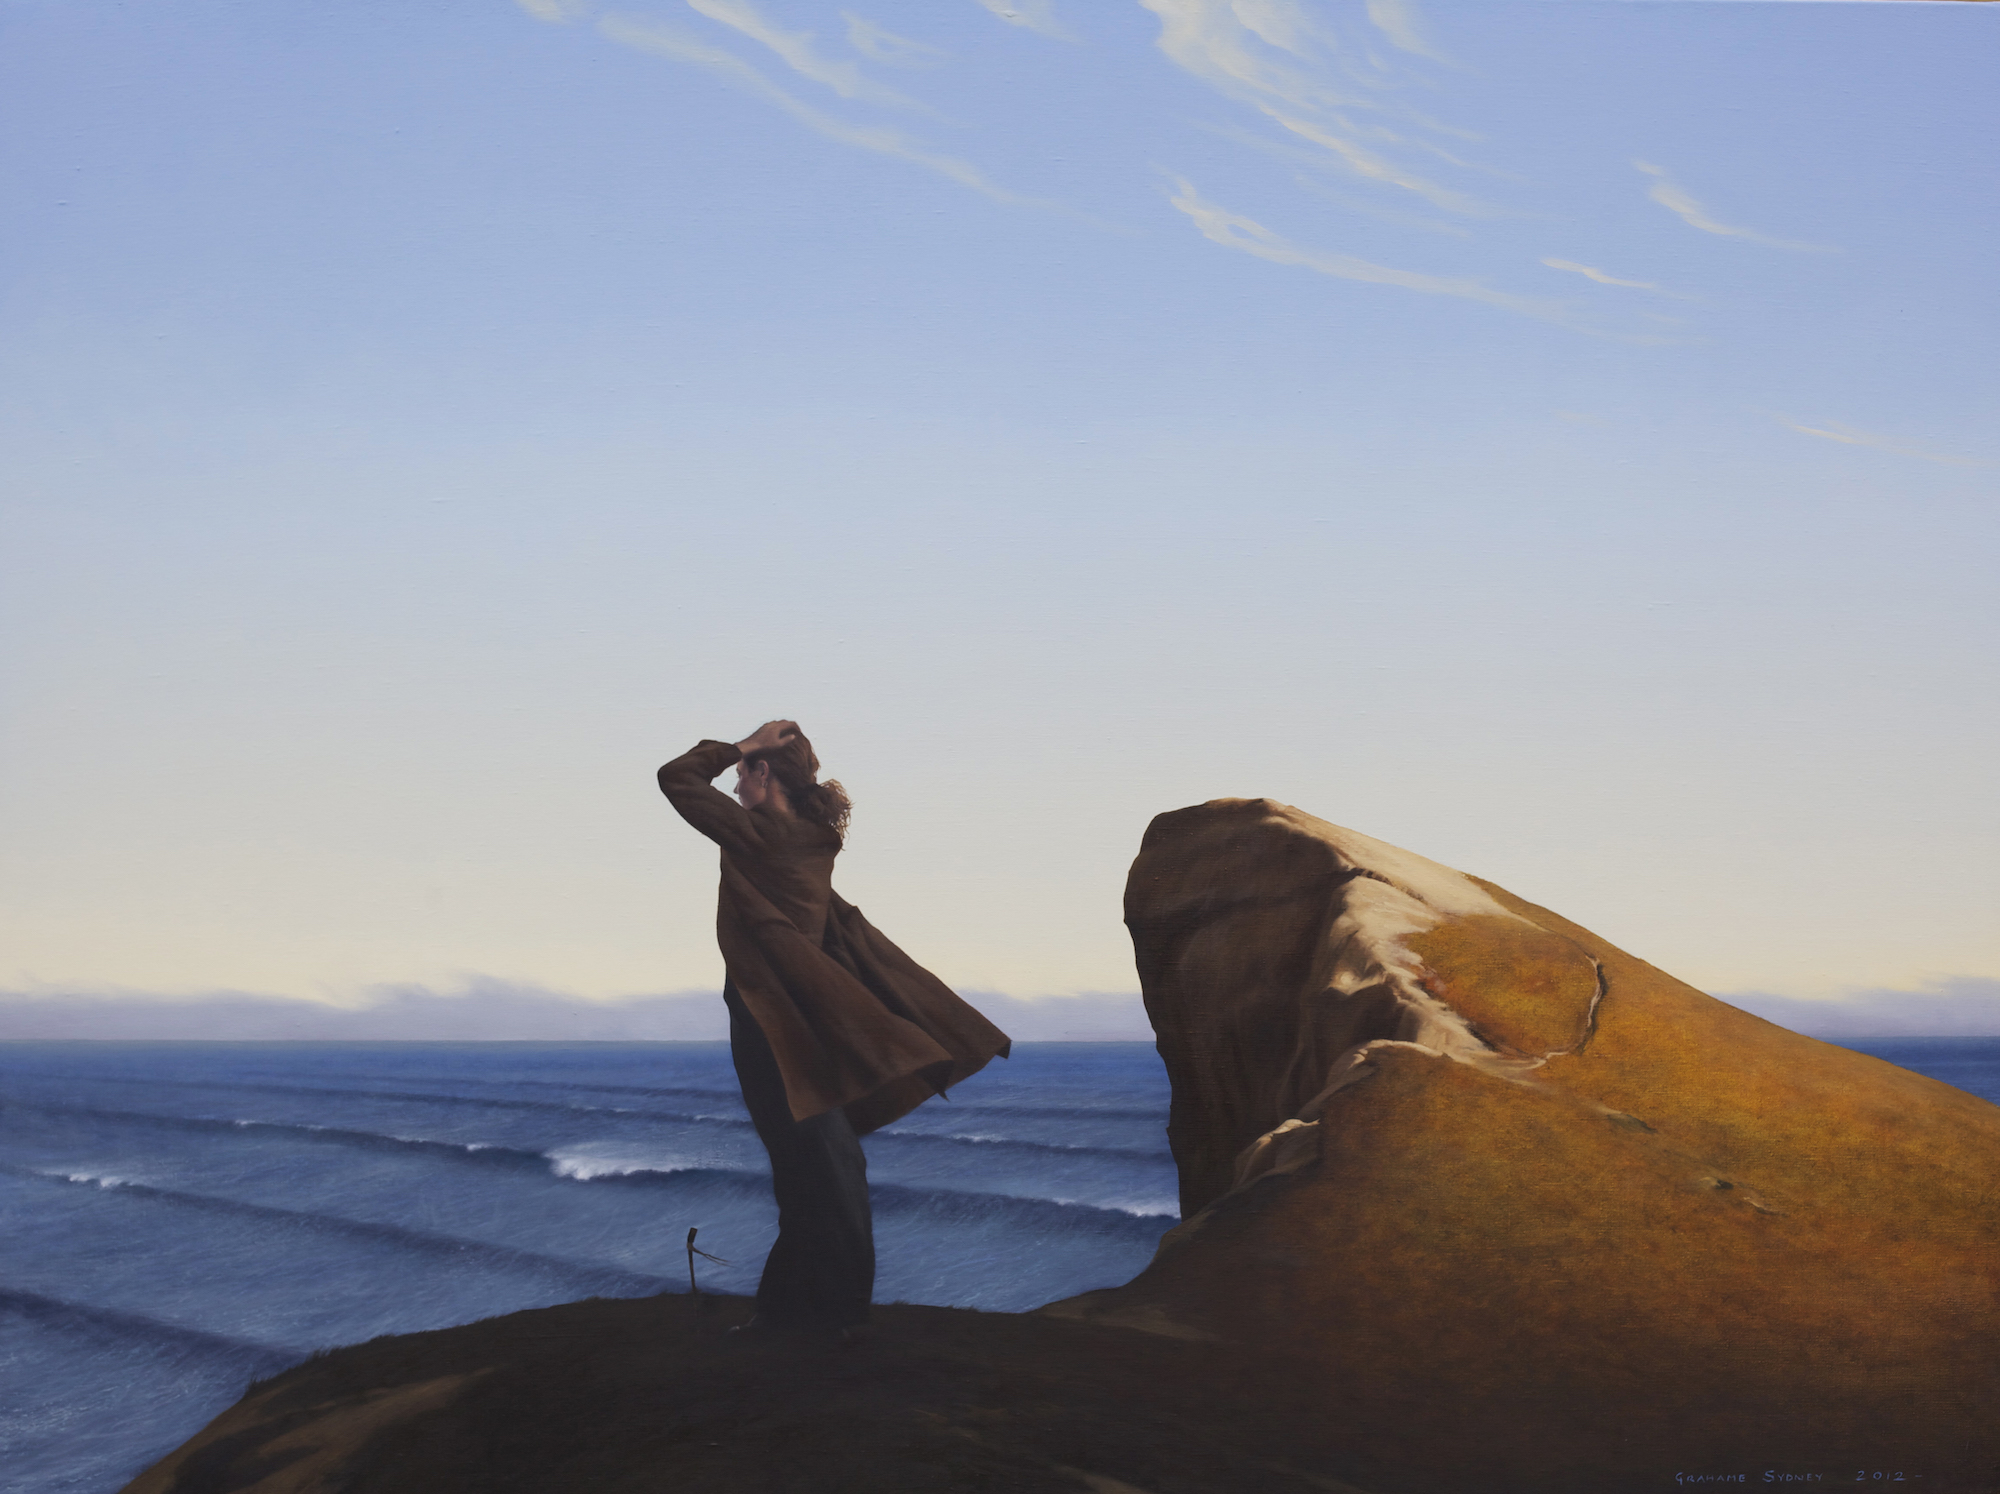 Melissa at Tunnel Beach. Oil on Linen. 920 x 1220 mm. 2012. Private Collection, Australia